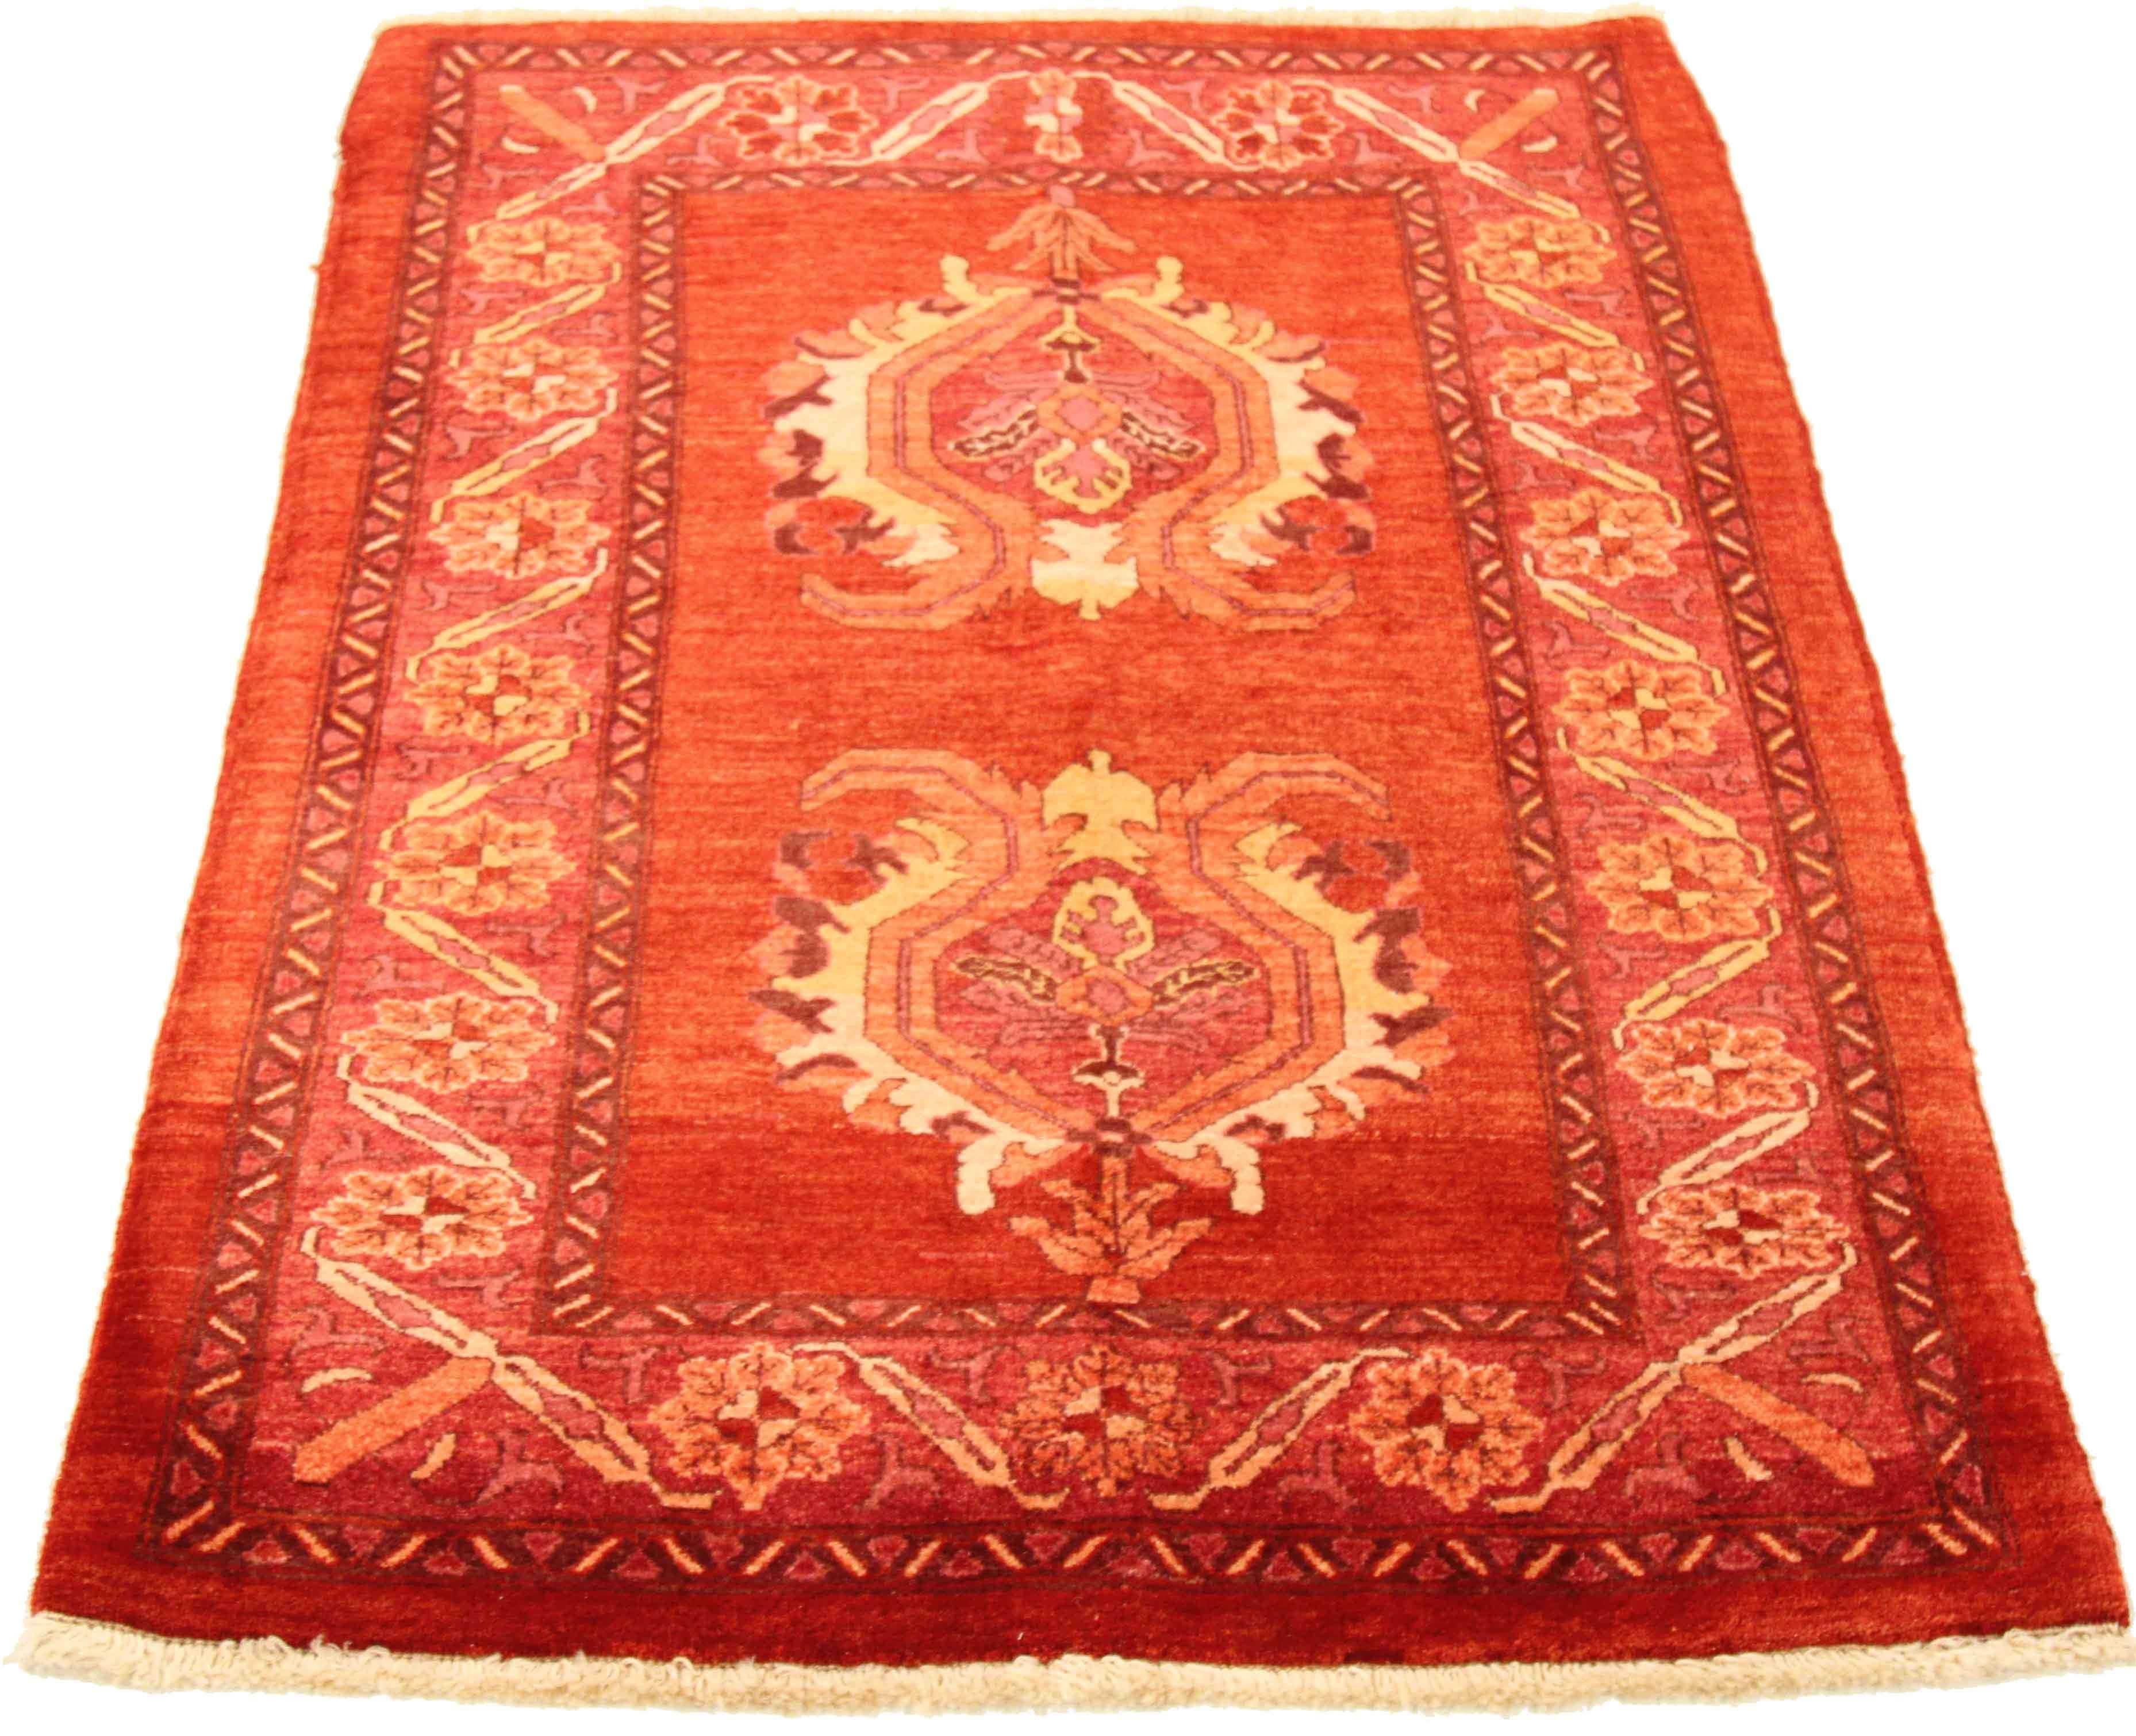 Antique Persian area rug handwoven from the finest sheep’s wool. It’s colored with all-natural vegetable dyes that are safe for humans and pets. It’s a traditional Art Deco design handwoven by expert artisans. It’s a lovely area rug that can be